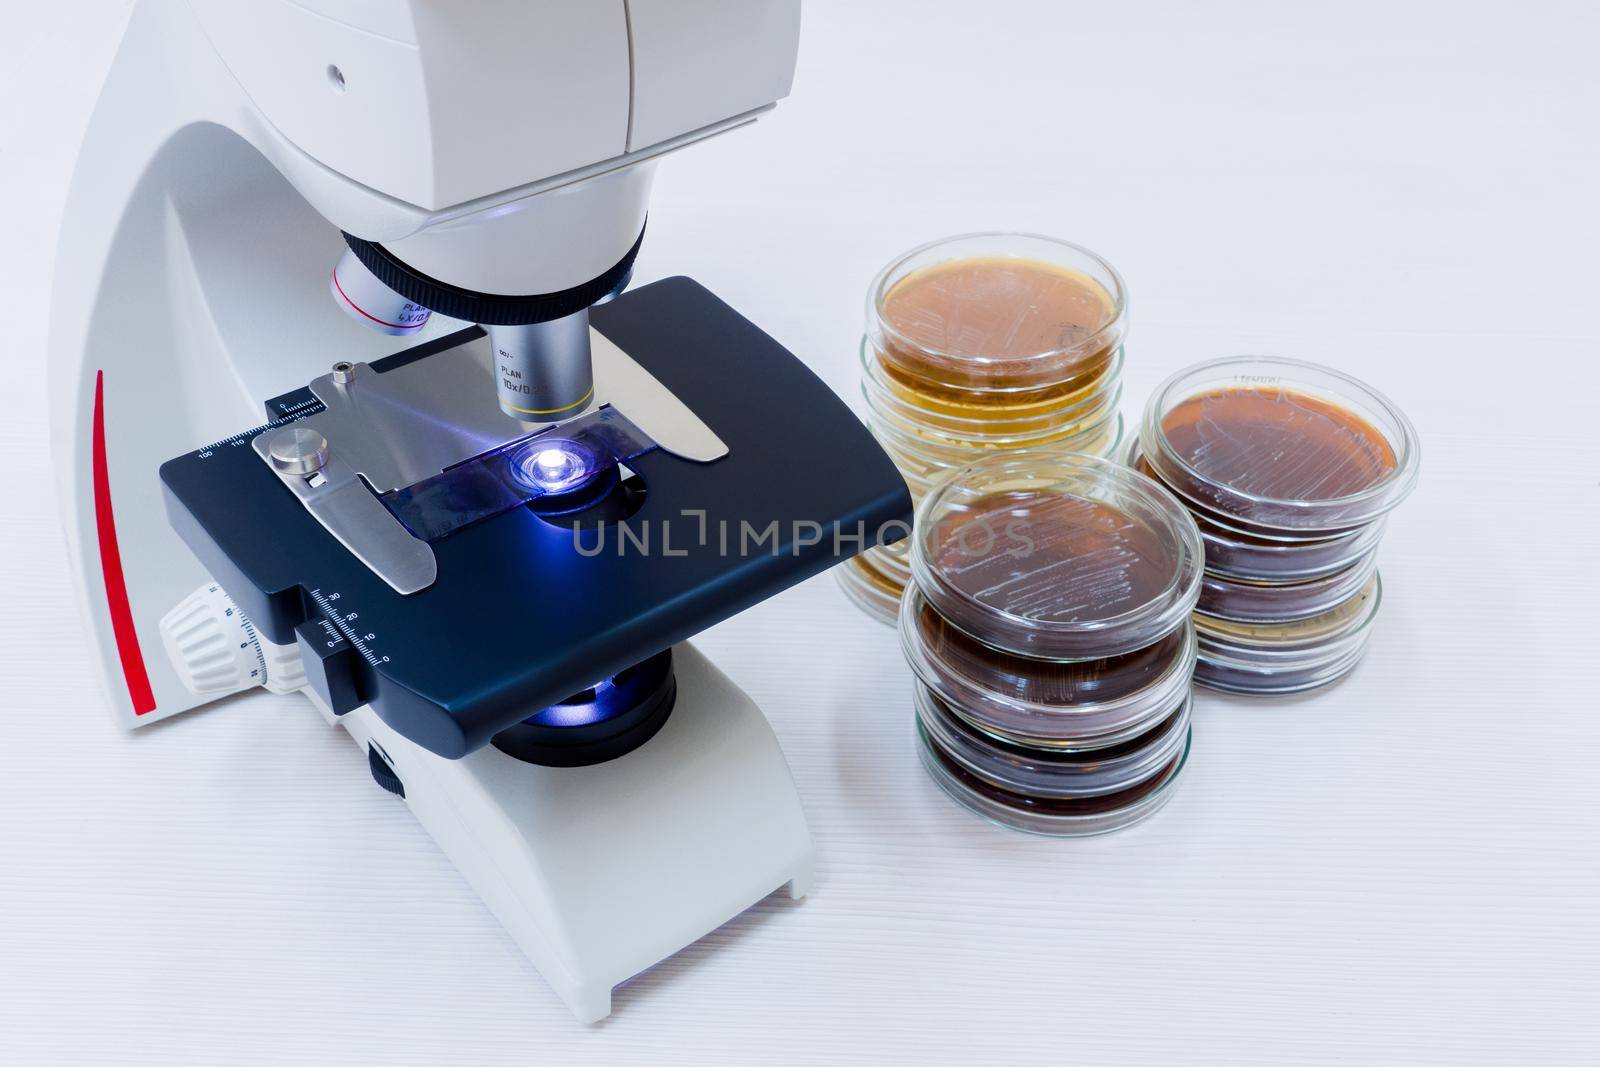 A microscope and petri dishes are near. A microscope on the desktop and next to it lie petri dishes. by Jannetta